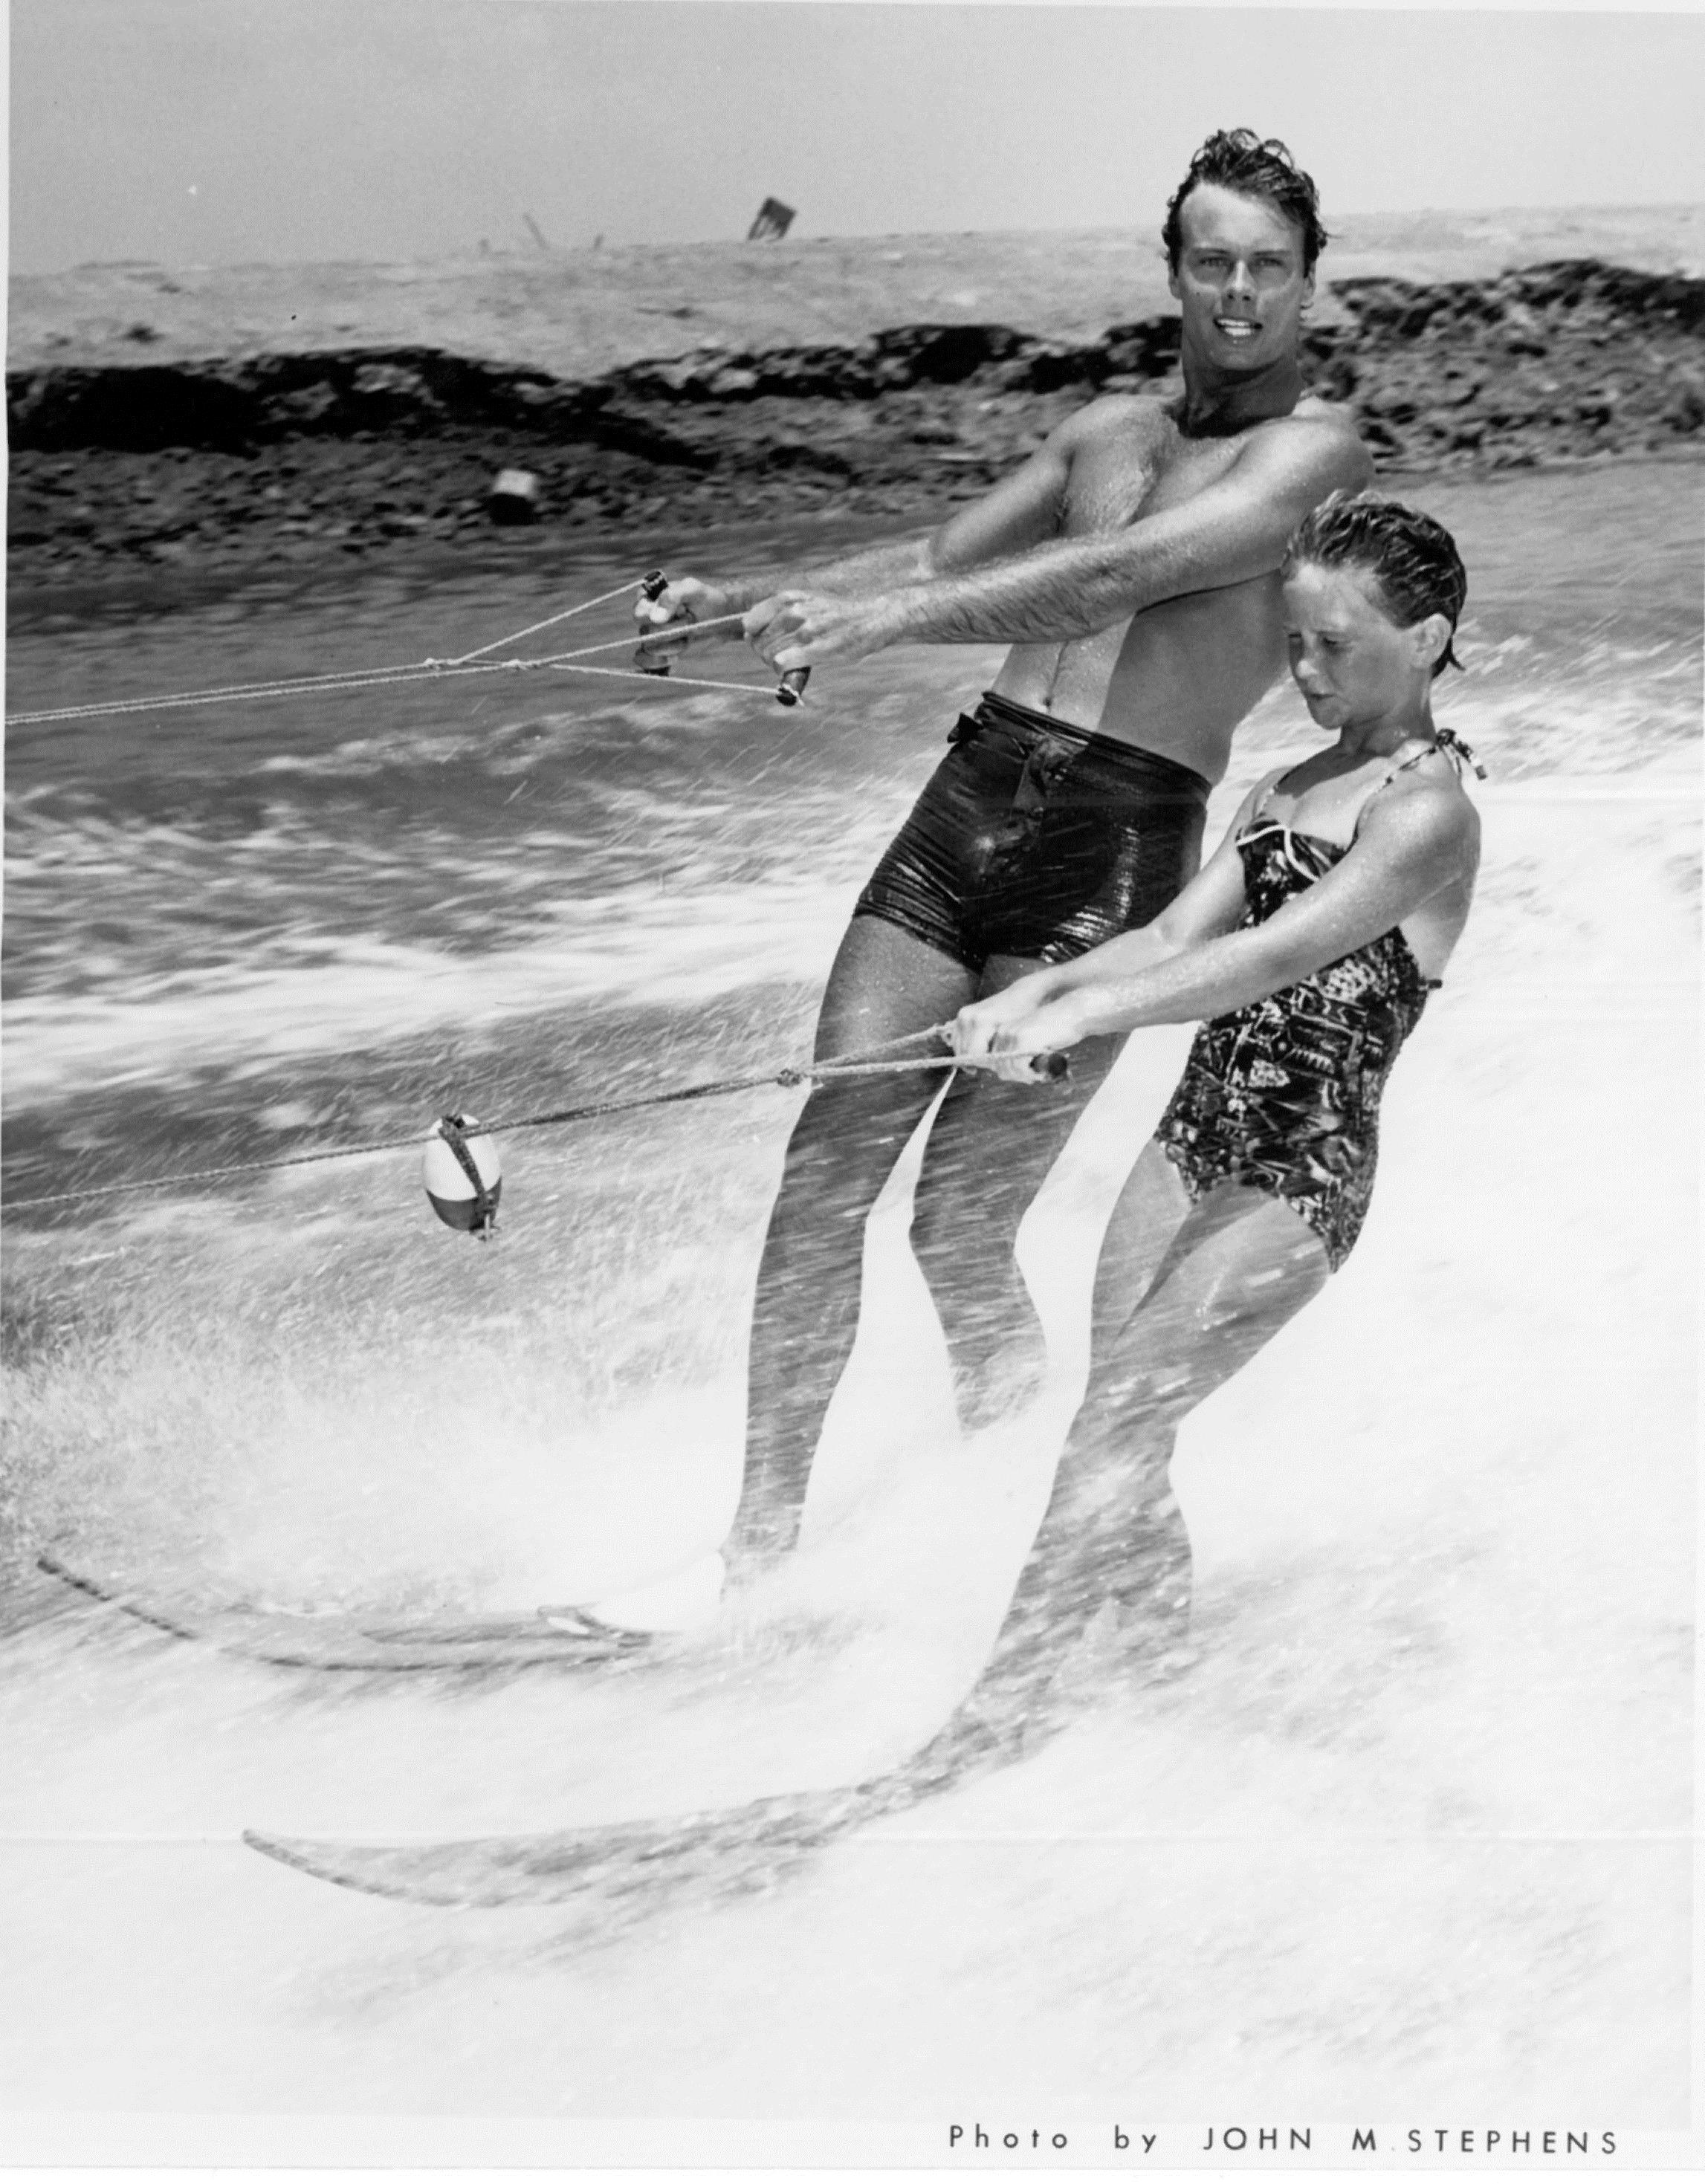  “Bobby skied with this young skiing champion when he visited us at the naval station at China Lake where Sandy was stationed in the mid-1950s.”  Source: Lillian Francis Robins, interview, May 11, 1991.   